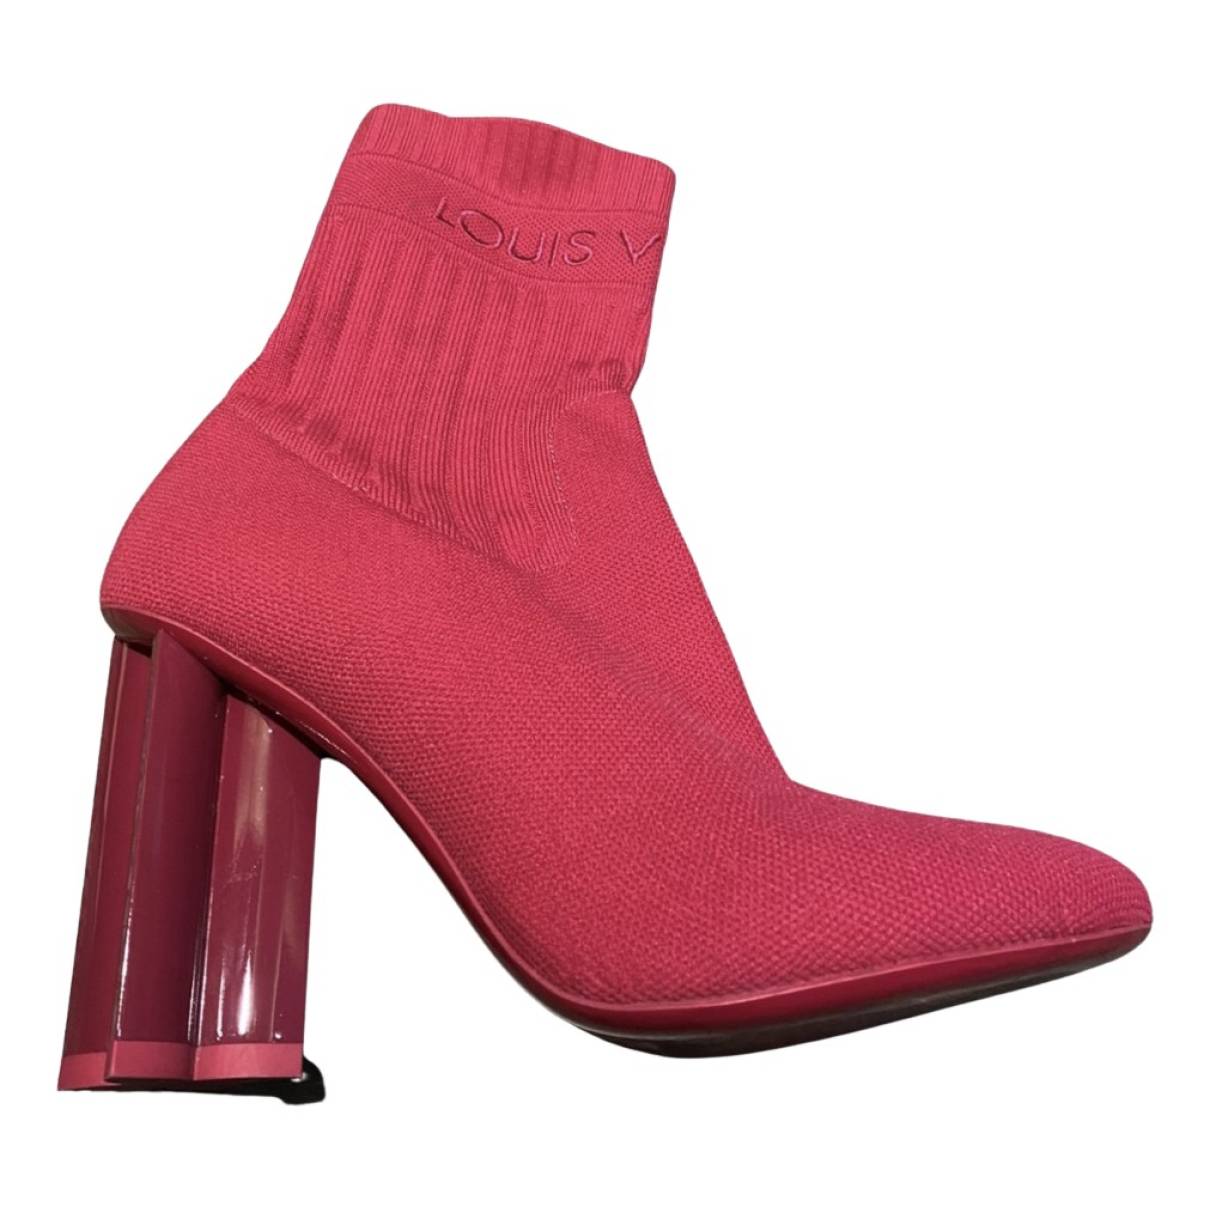 Cloth ankle boots Louis Vuitton Pink size 38 EU in Cloth - 20210618